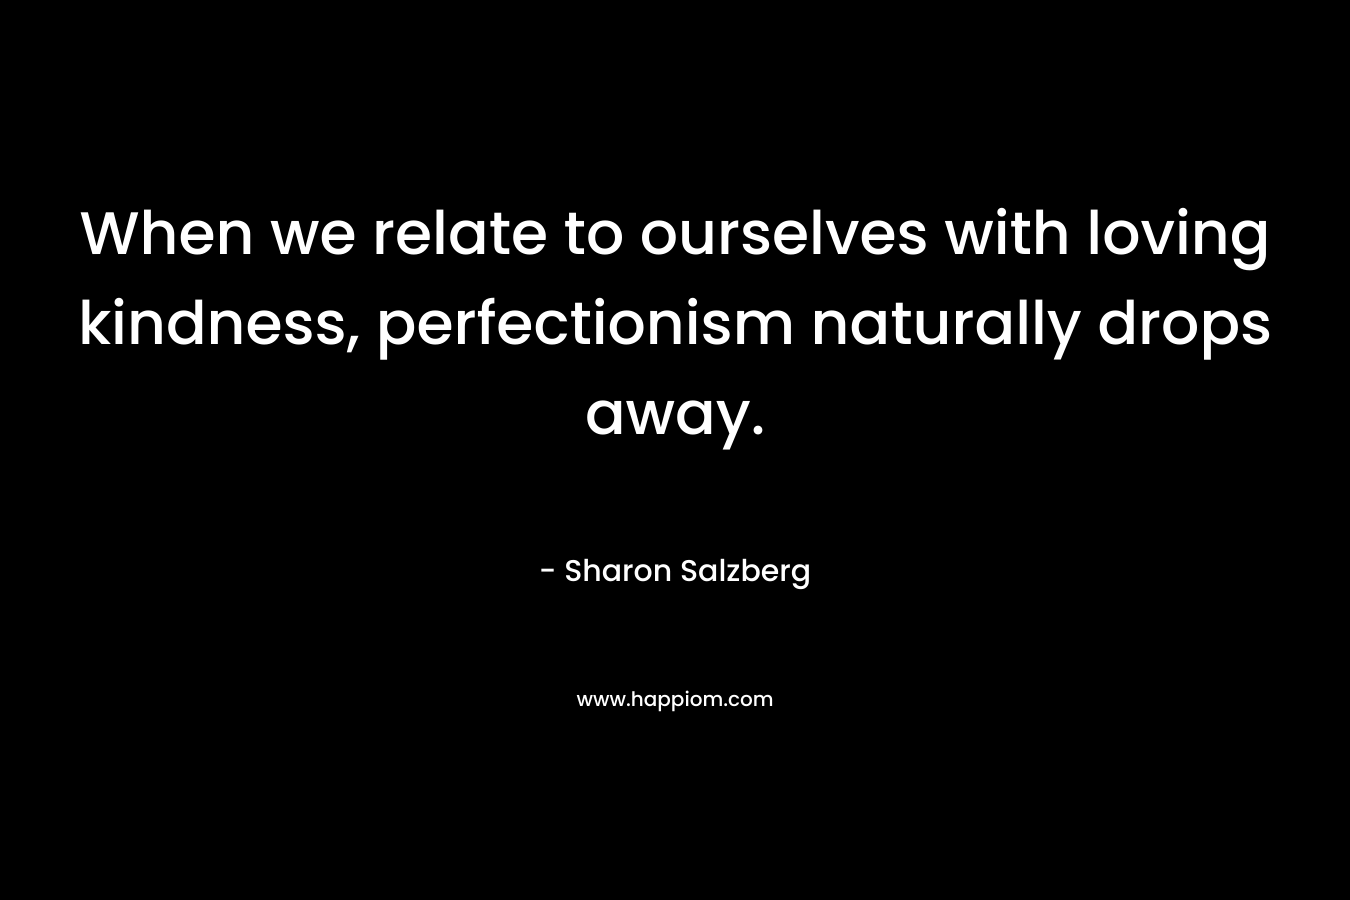 When we relate to ourselves with loving kindness, perfectionism naturally drops away.